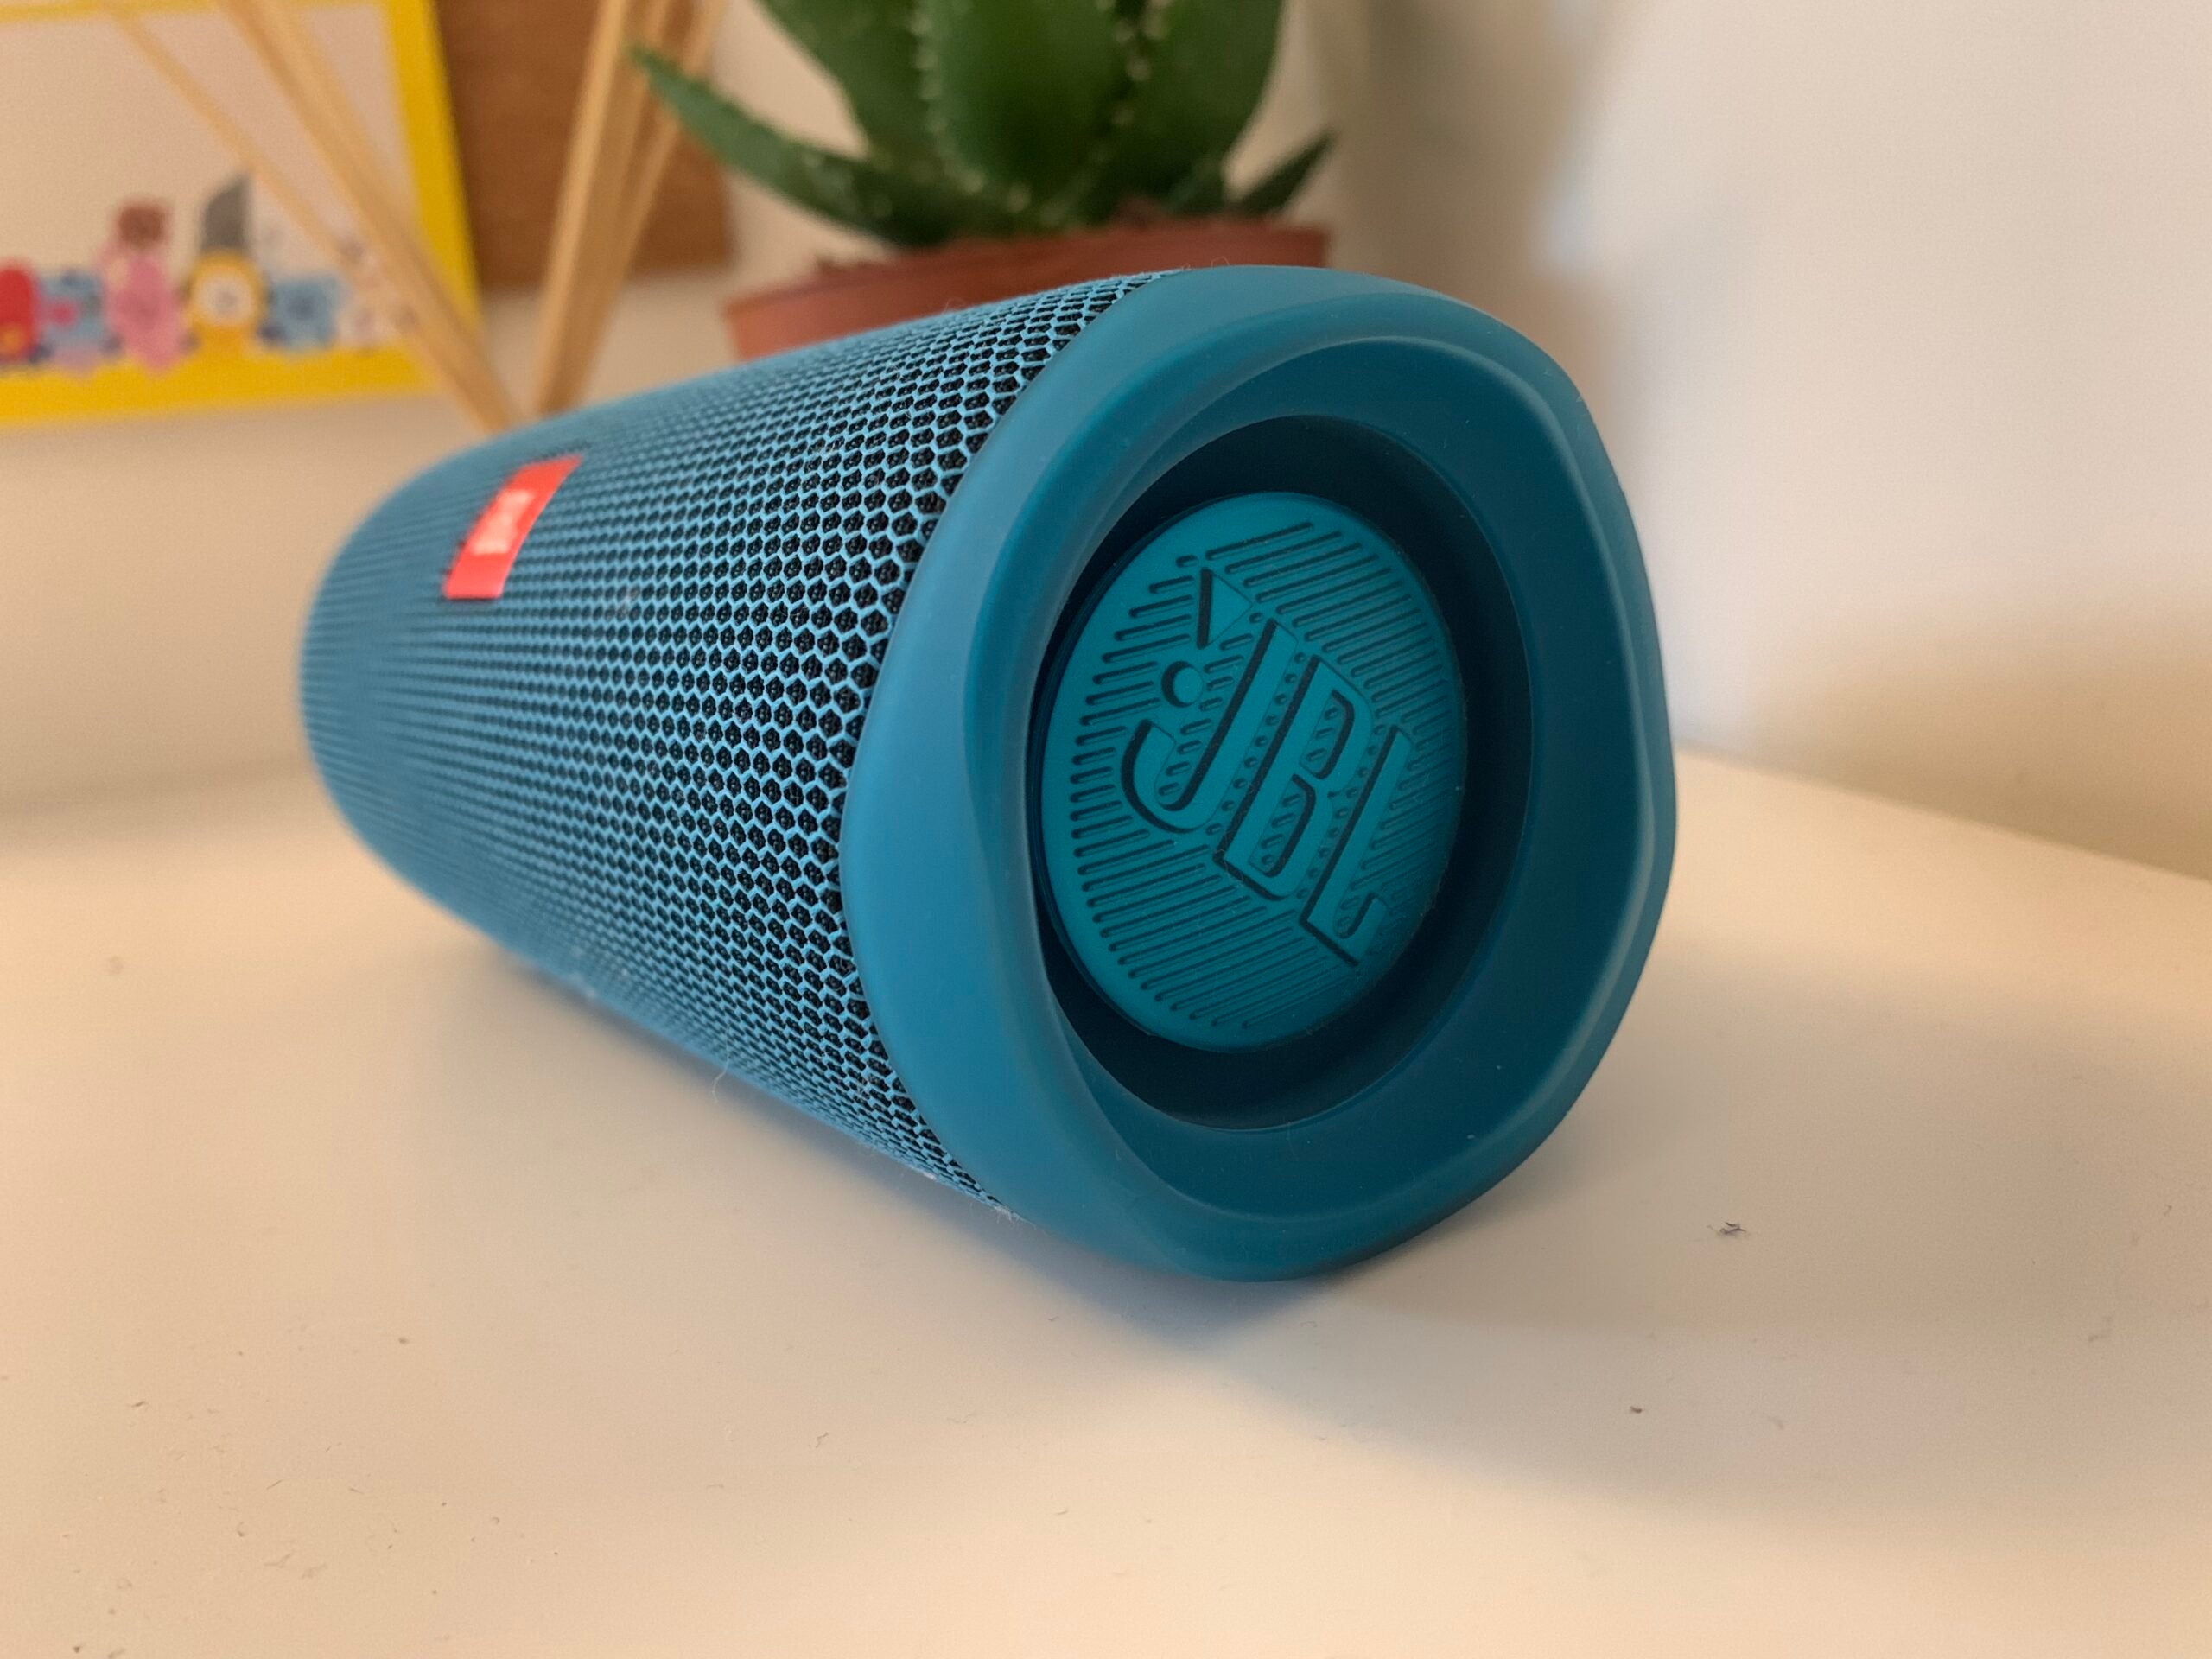 ven crimen Tiempos antiguos JBL Flip 5 Review: Affordable speaker for the outdoors | Trusted Reviews